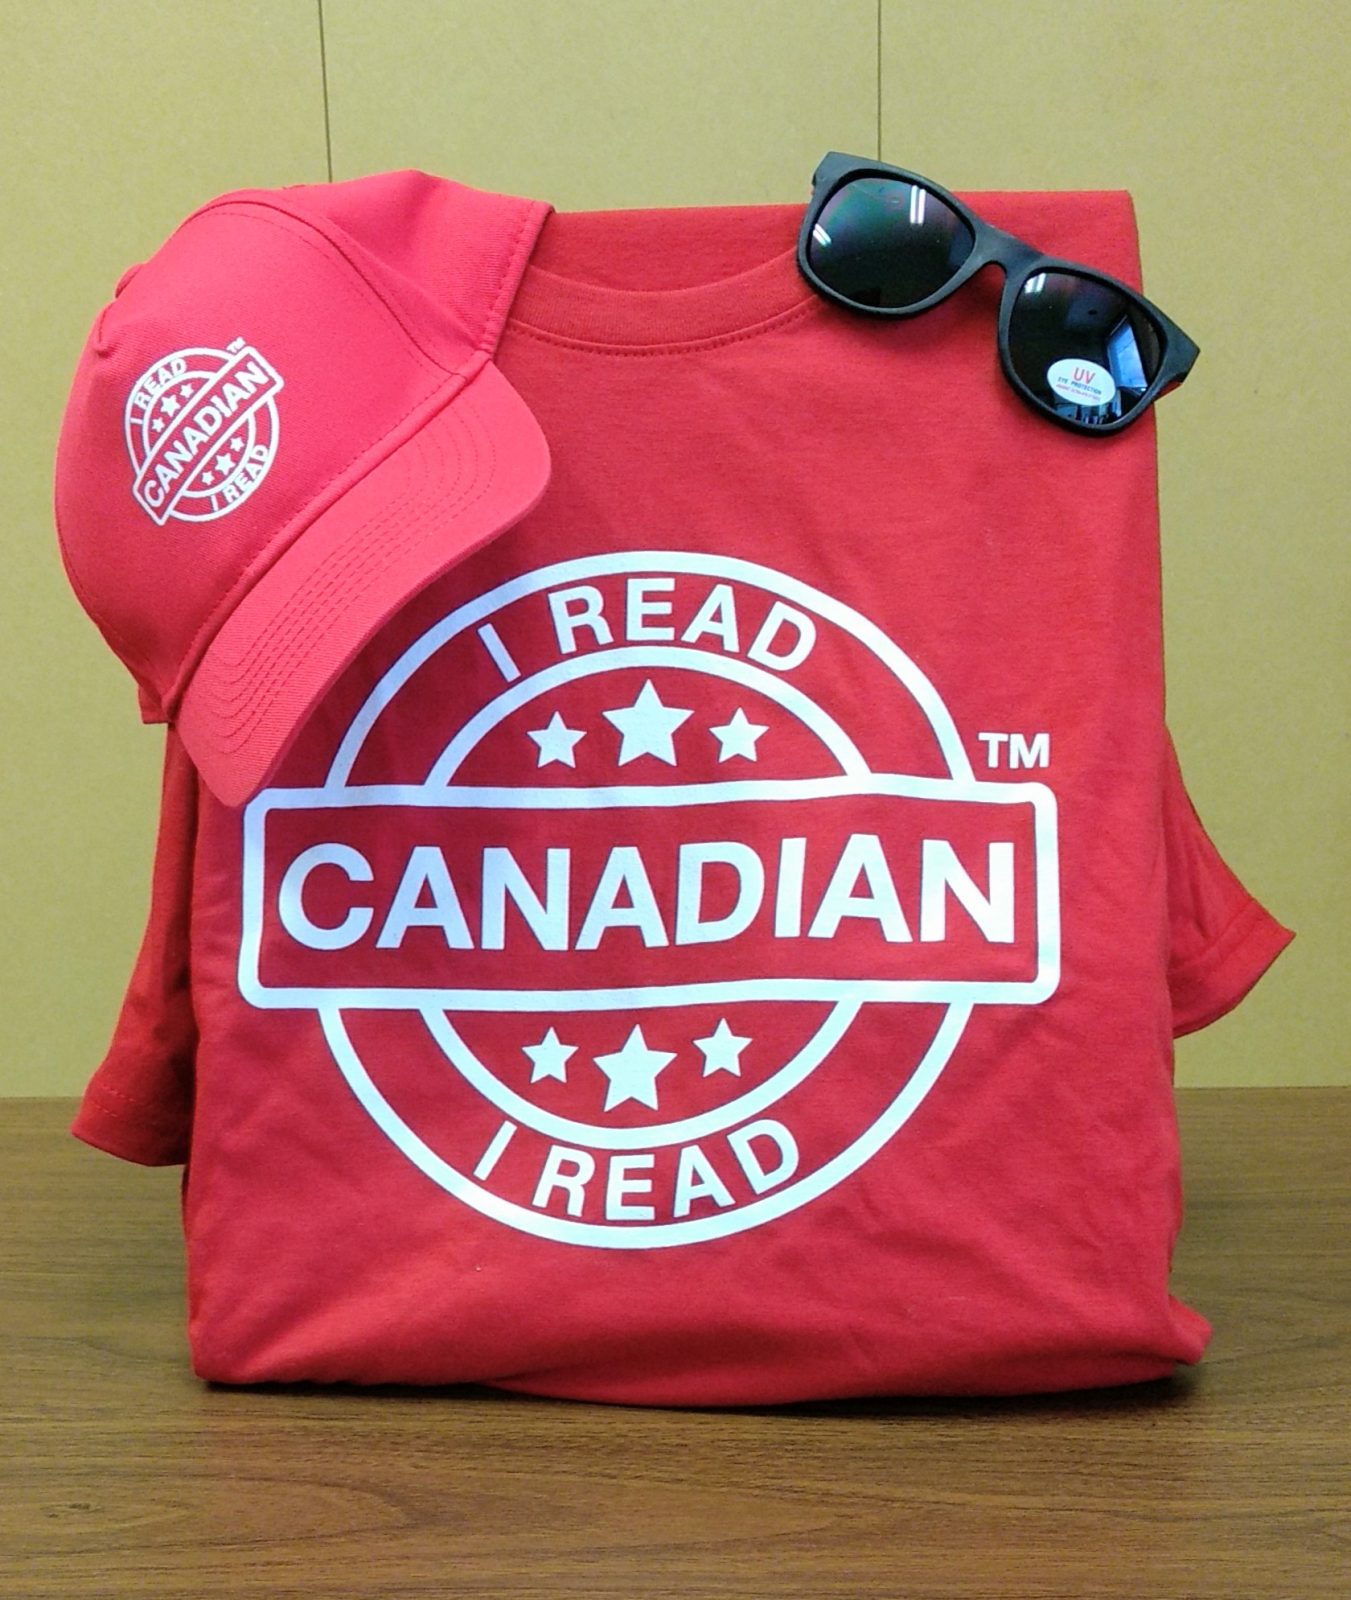 Read Canadian at the library this summer